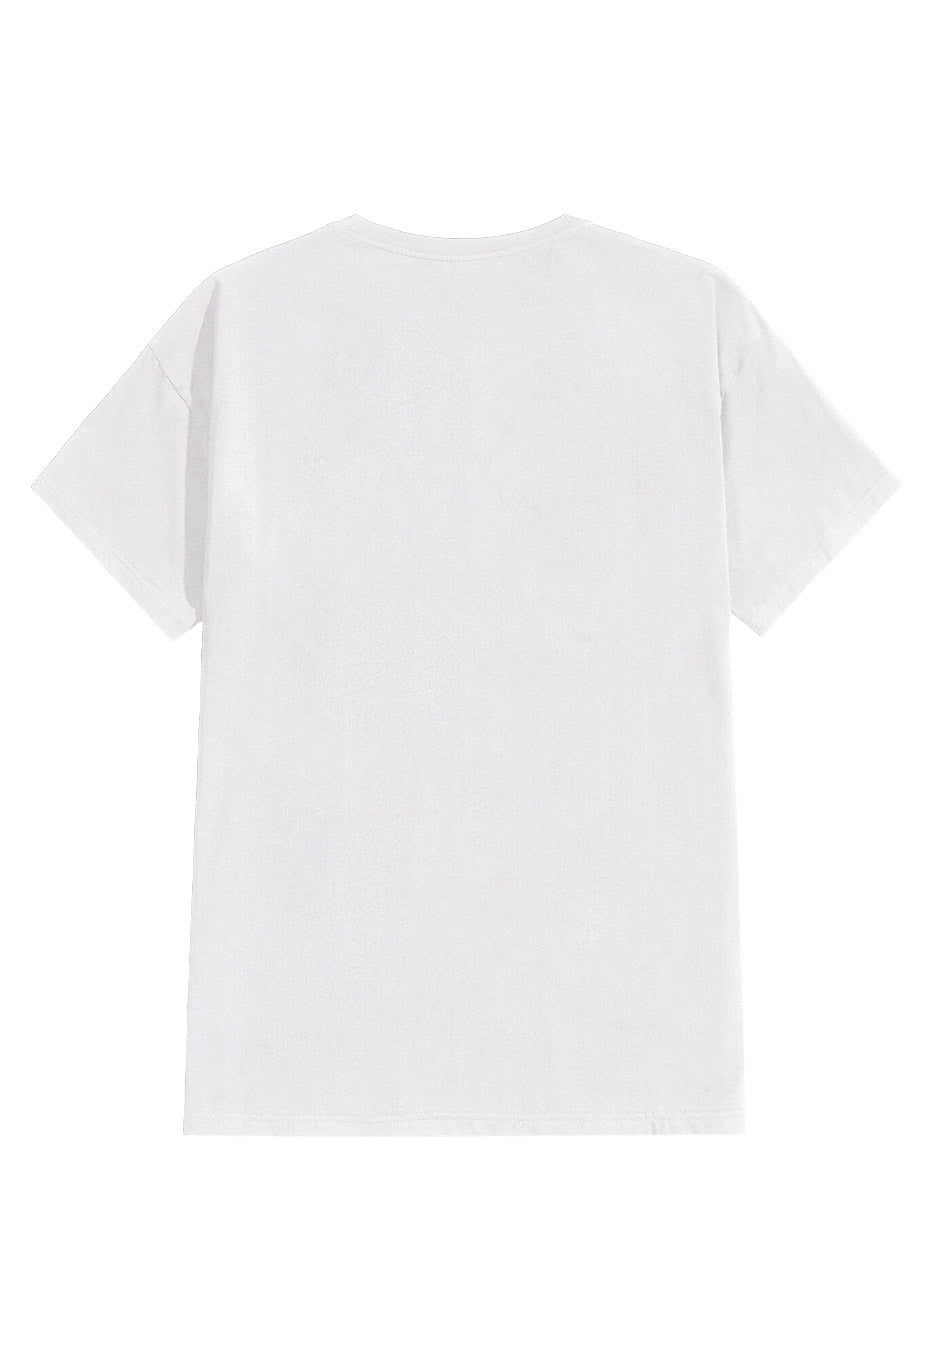 Lost Society - Fists White - T-Shirt | Neutral-Image